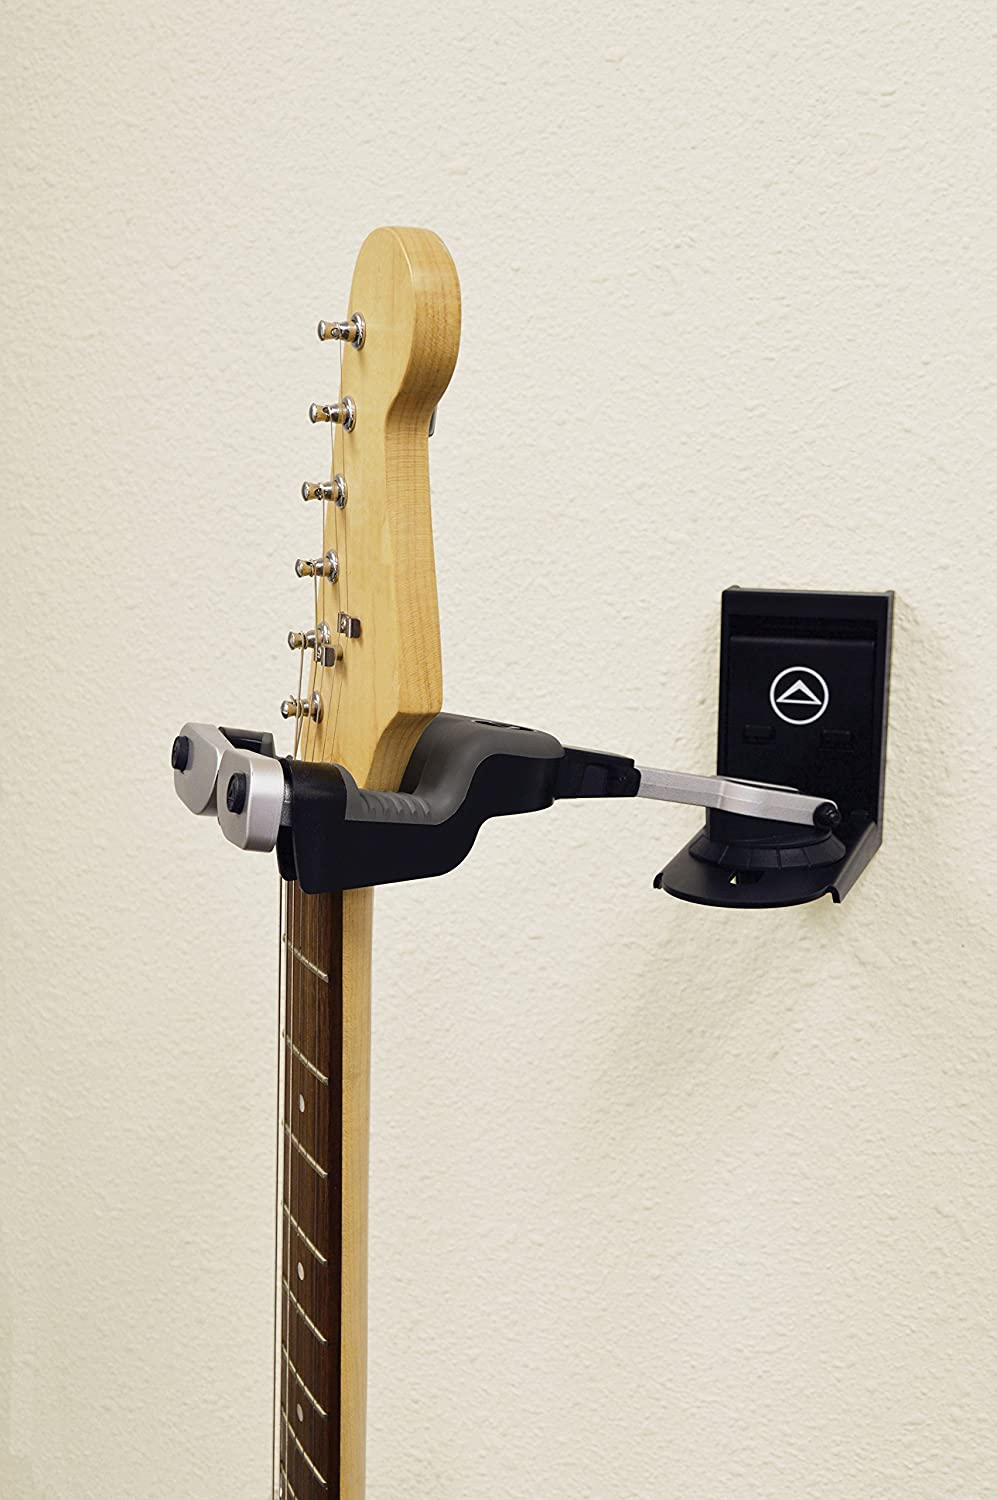 Ultimate Support GS-10 Pro - GS-10 Pro Guitar Wall and Slat Mount [Special Order]